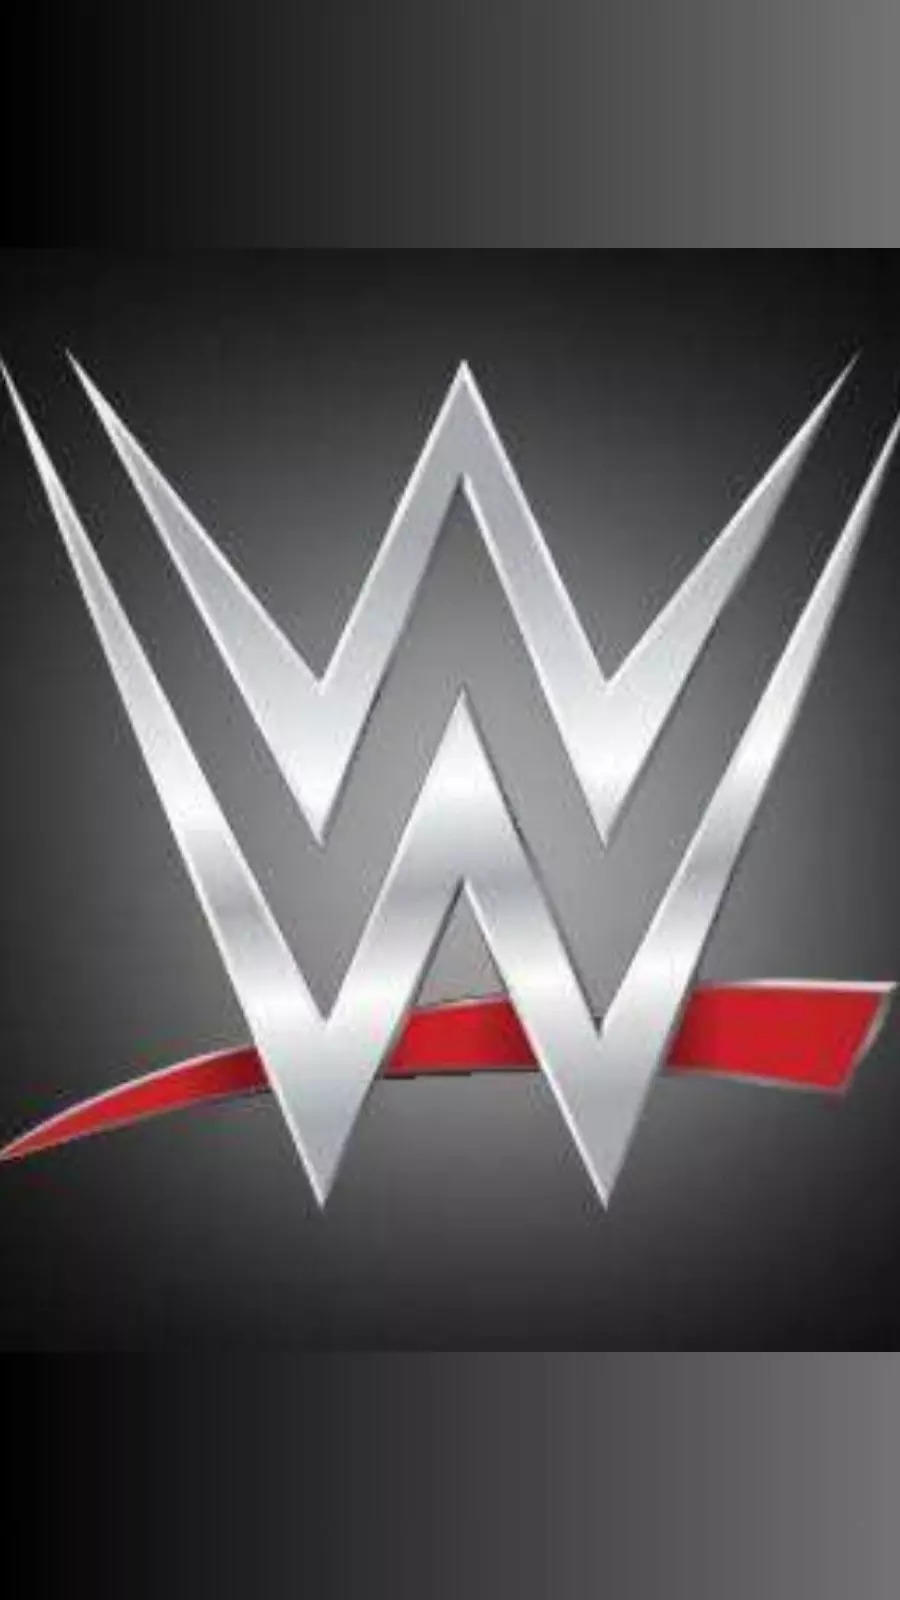 WWE Premium Live Events (PLEs) in 2023 ranked